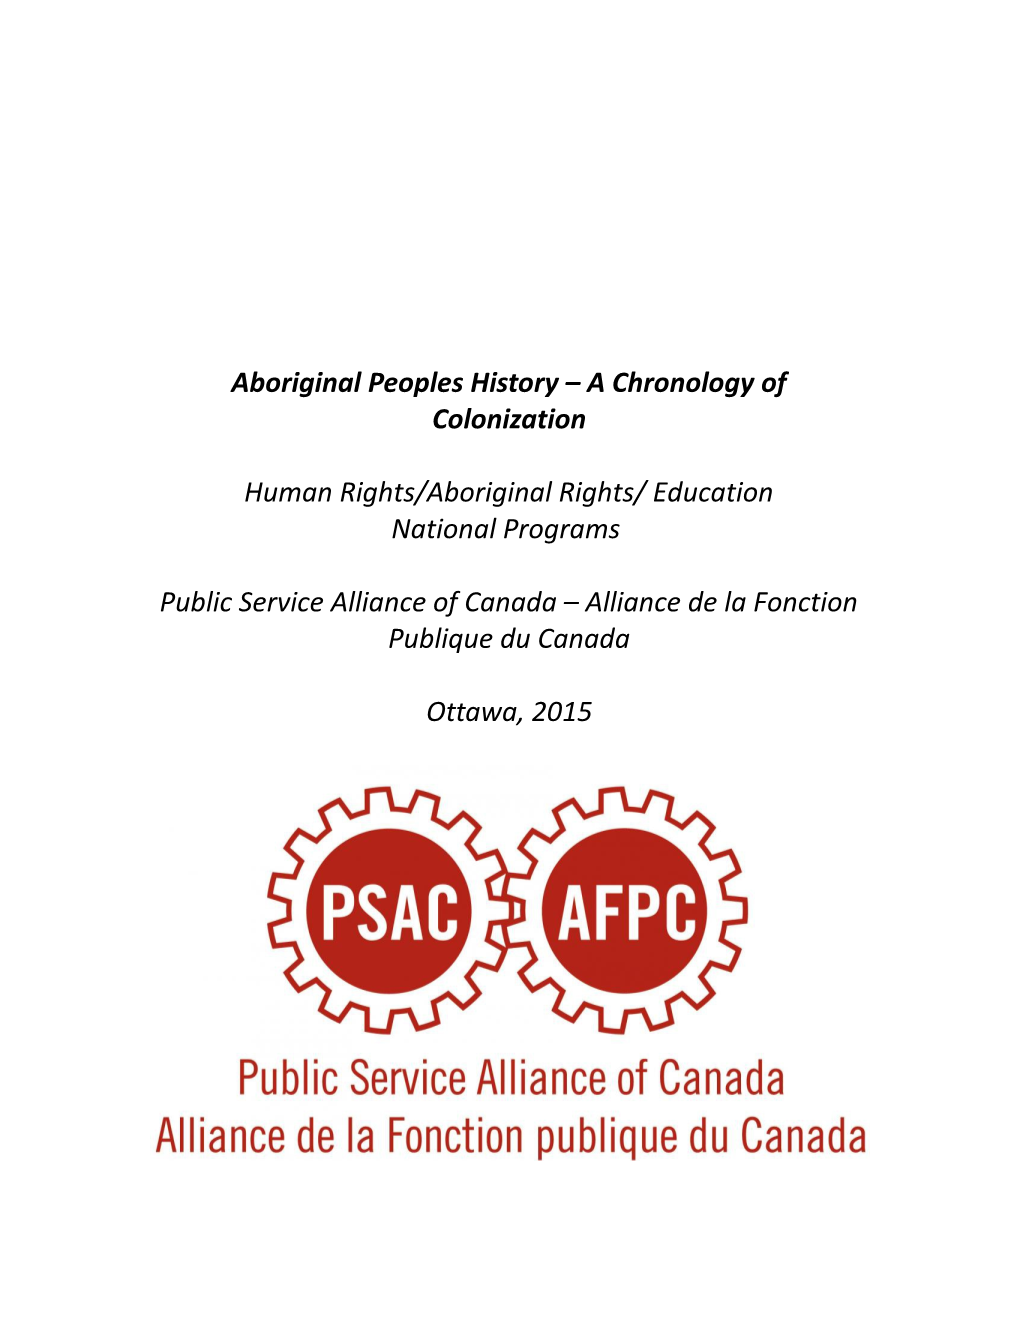 Aboriginal Peoples History - a Chronology of Colonization